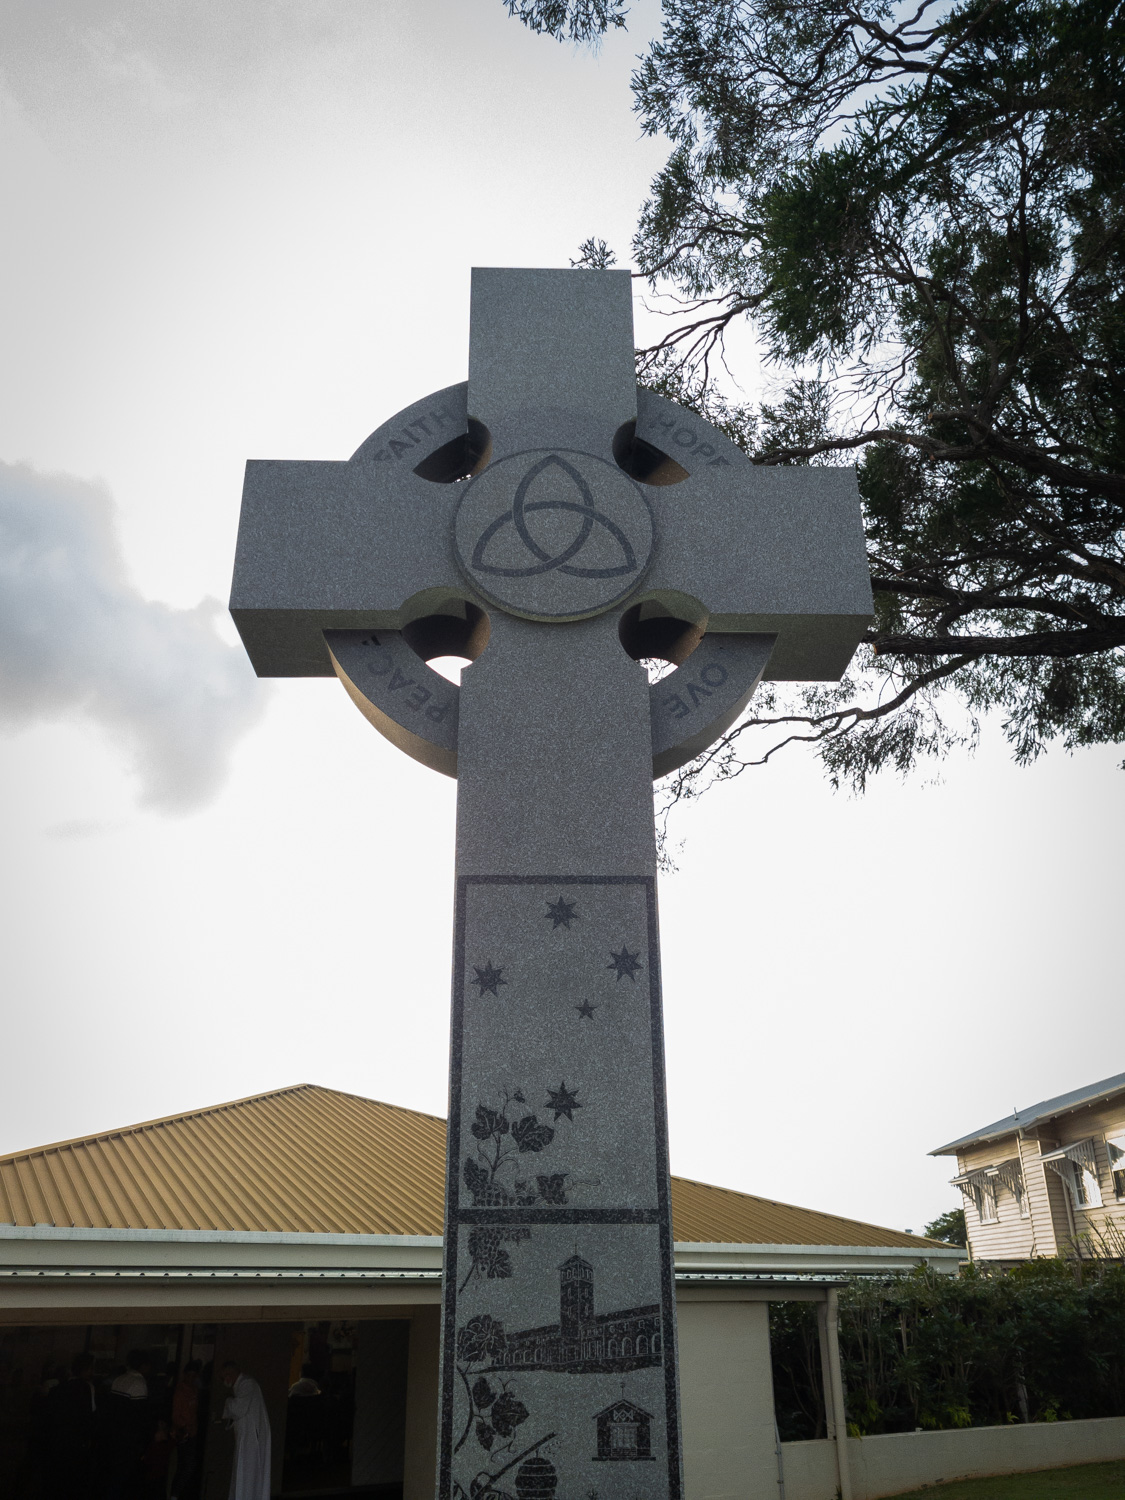 The Banyo Cross was created by T. Wrafter & Sons Stonemasons for the parishioners of the Holy Trinity Catholic Church at Banyo.